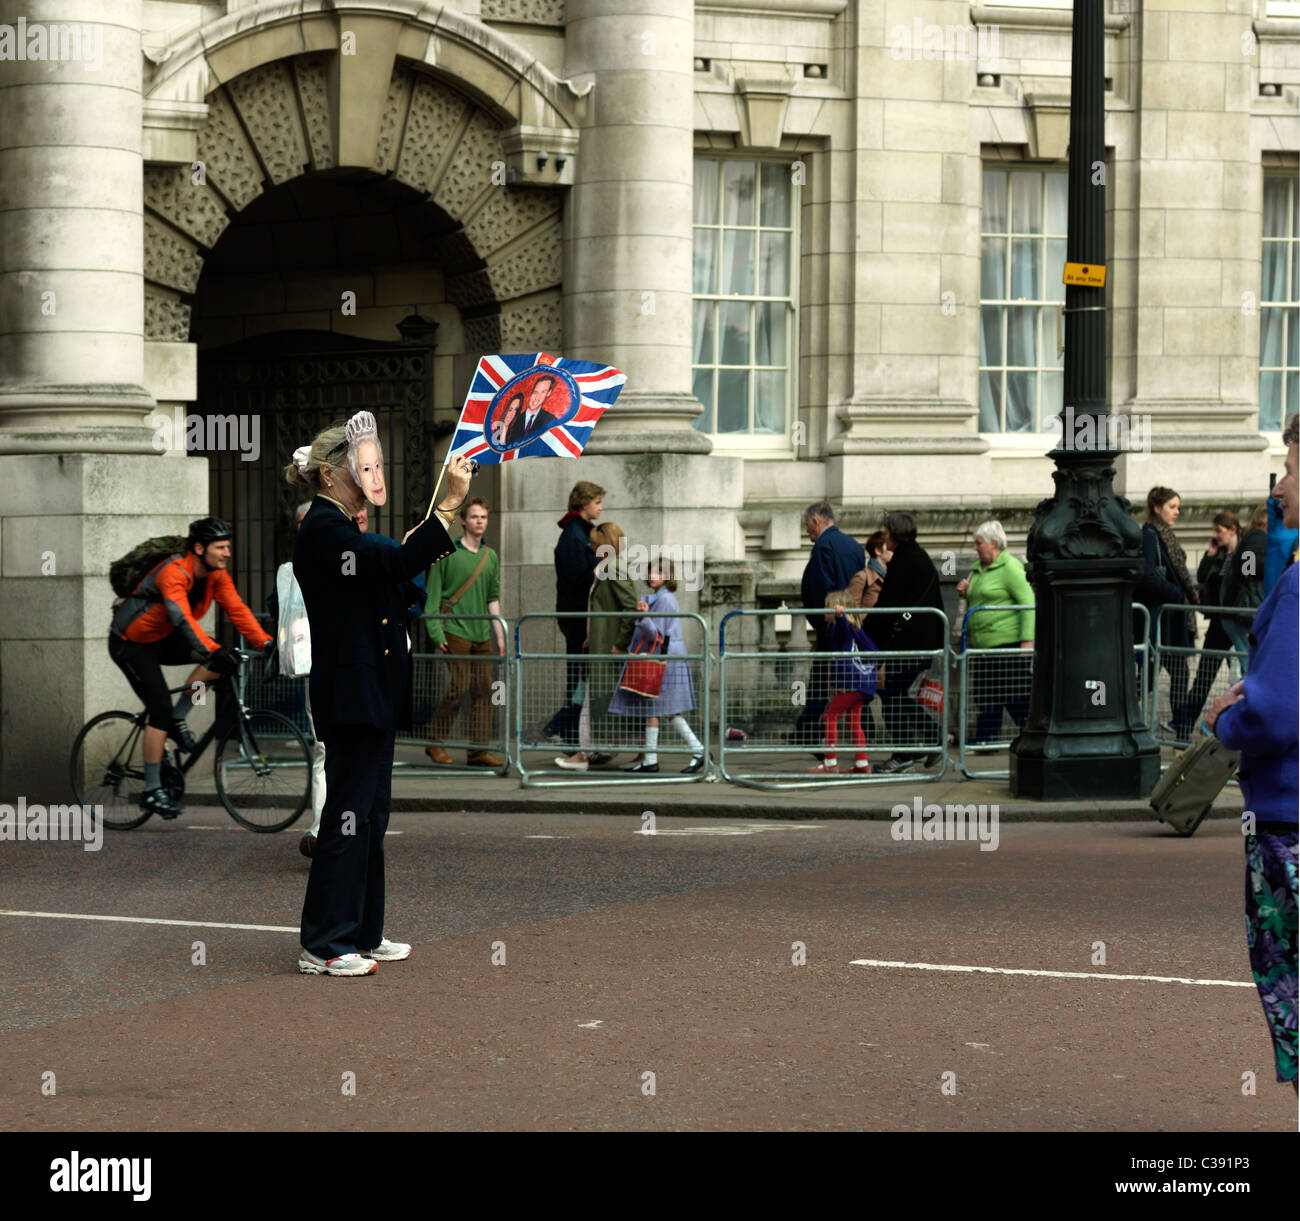 Royal Wedding Tourist Wearing a Mask of the Queen Taking a Photo Whilst Waving a Flag Stock Photo